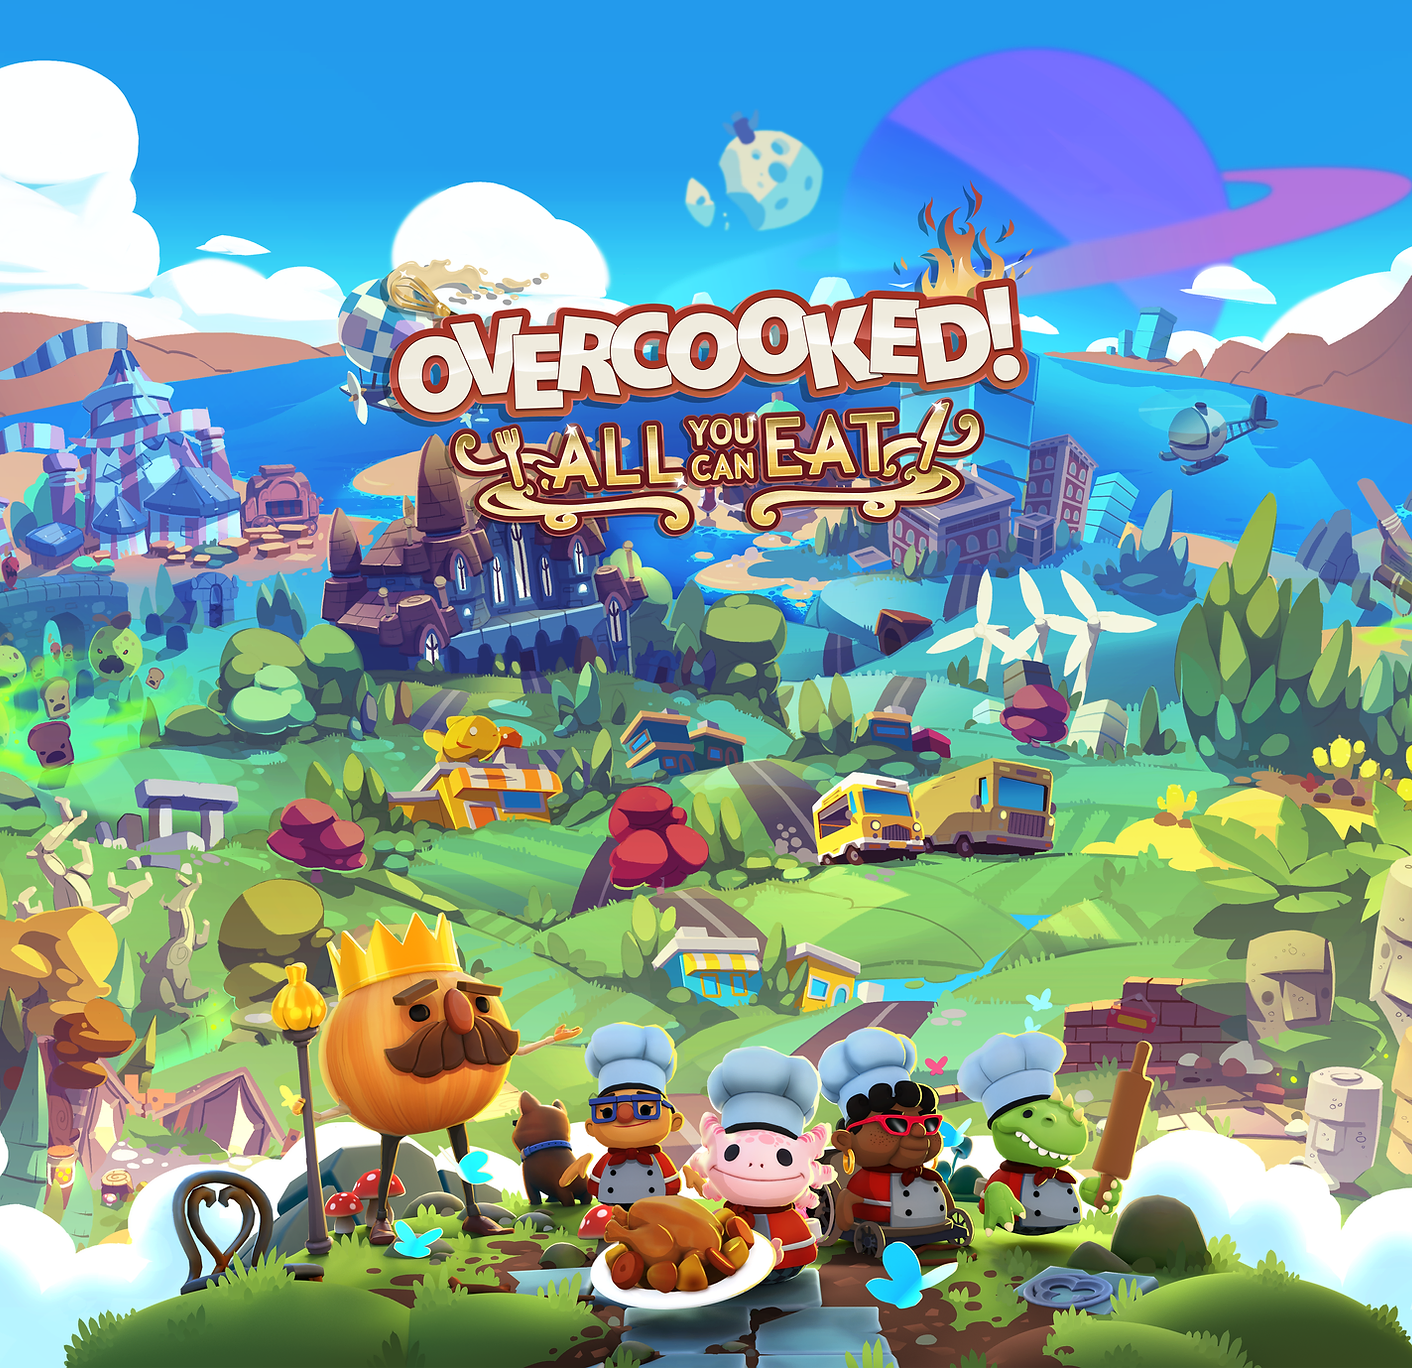 Overcooked! All You Can eat